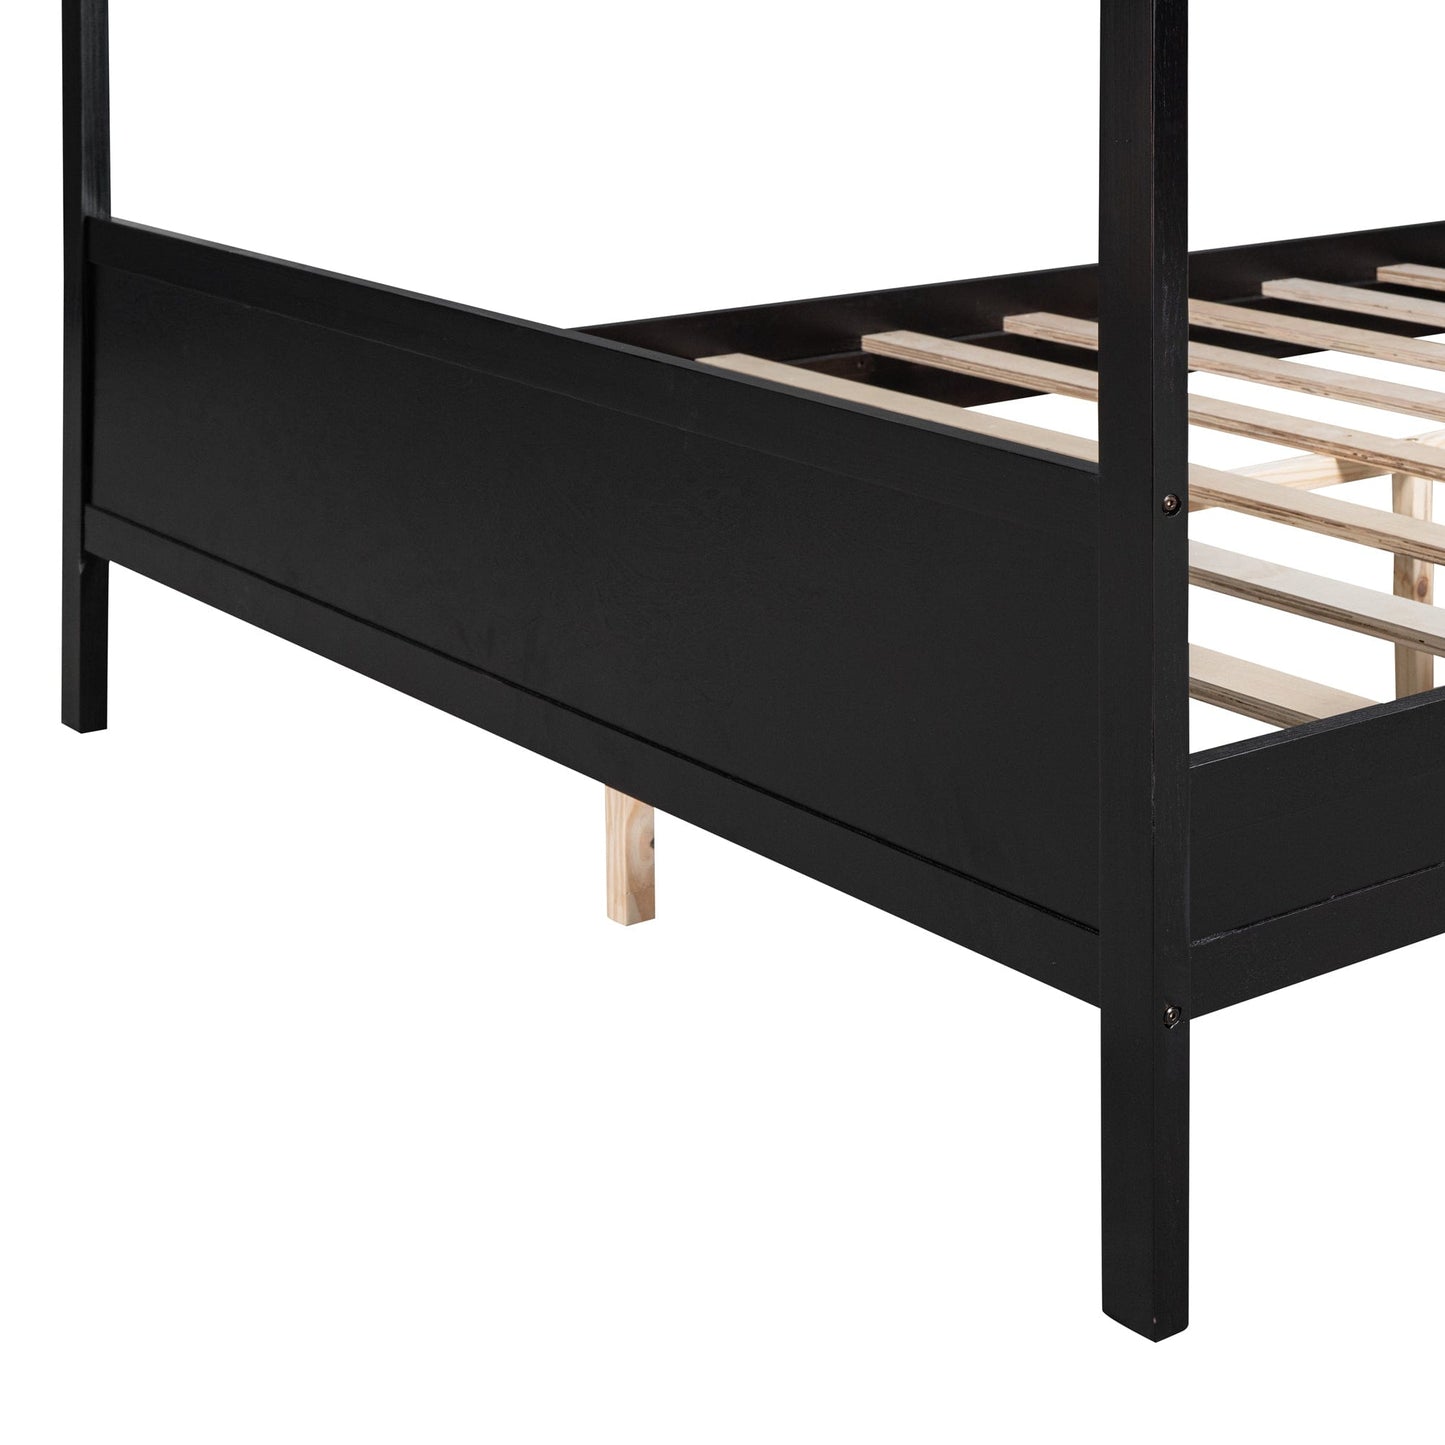 1st Choice Furniture Direct Beds & Bed Frames 1st Choice Queen Canopy Bed with Headboard & Footboard in Espresso